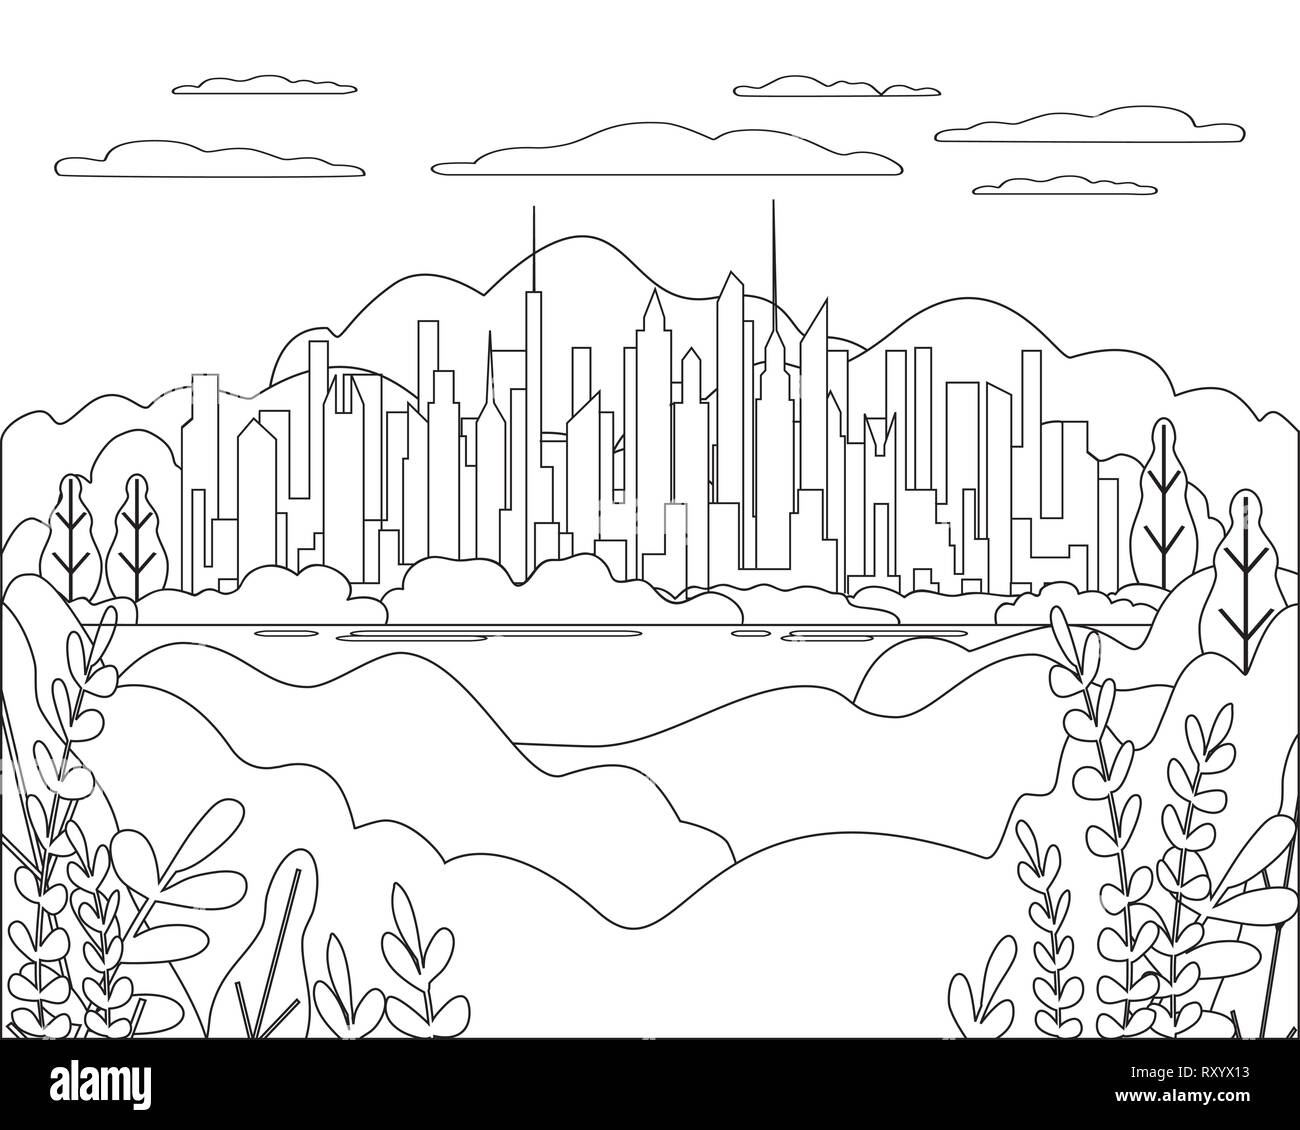 Thin line city landscape flat. Panorama design urban modern city with high skyscrapers, buildings, mountains, hills, trees, sky, clouds and sun. Line  Stock Vector